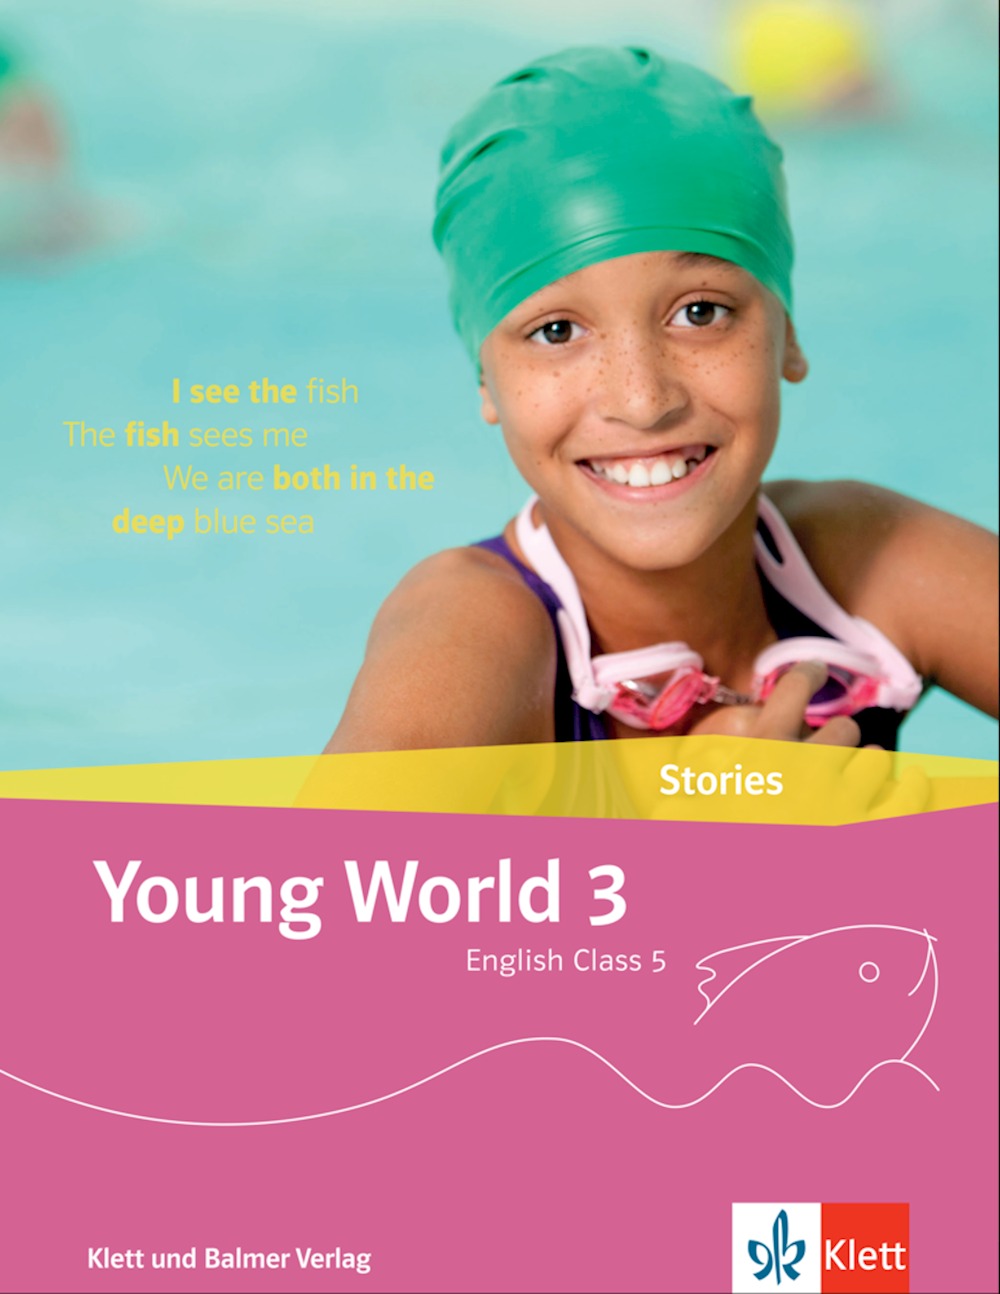 Young World 3, Stories, 10er-Paket 